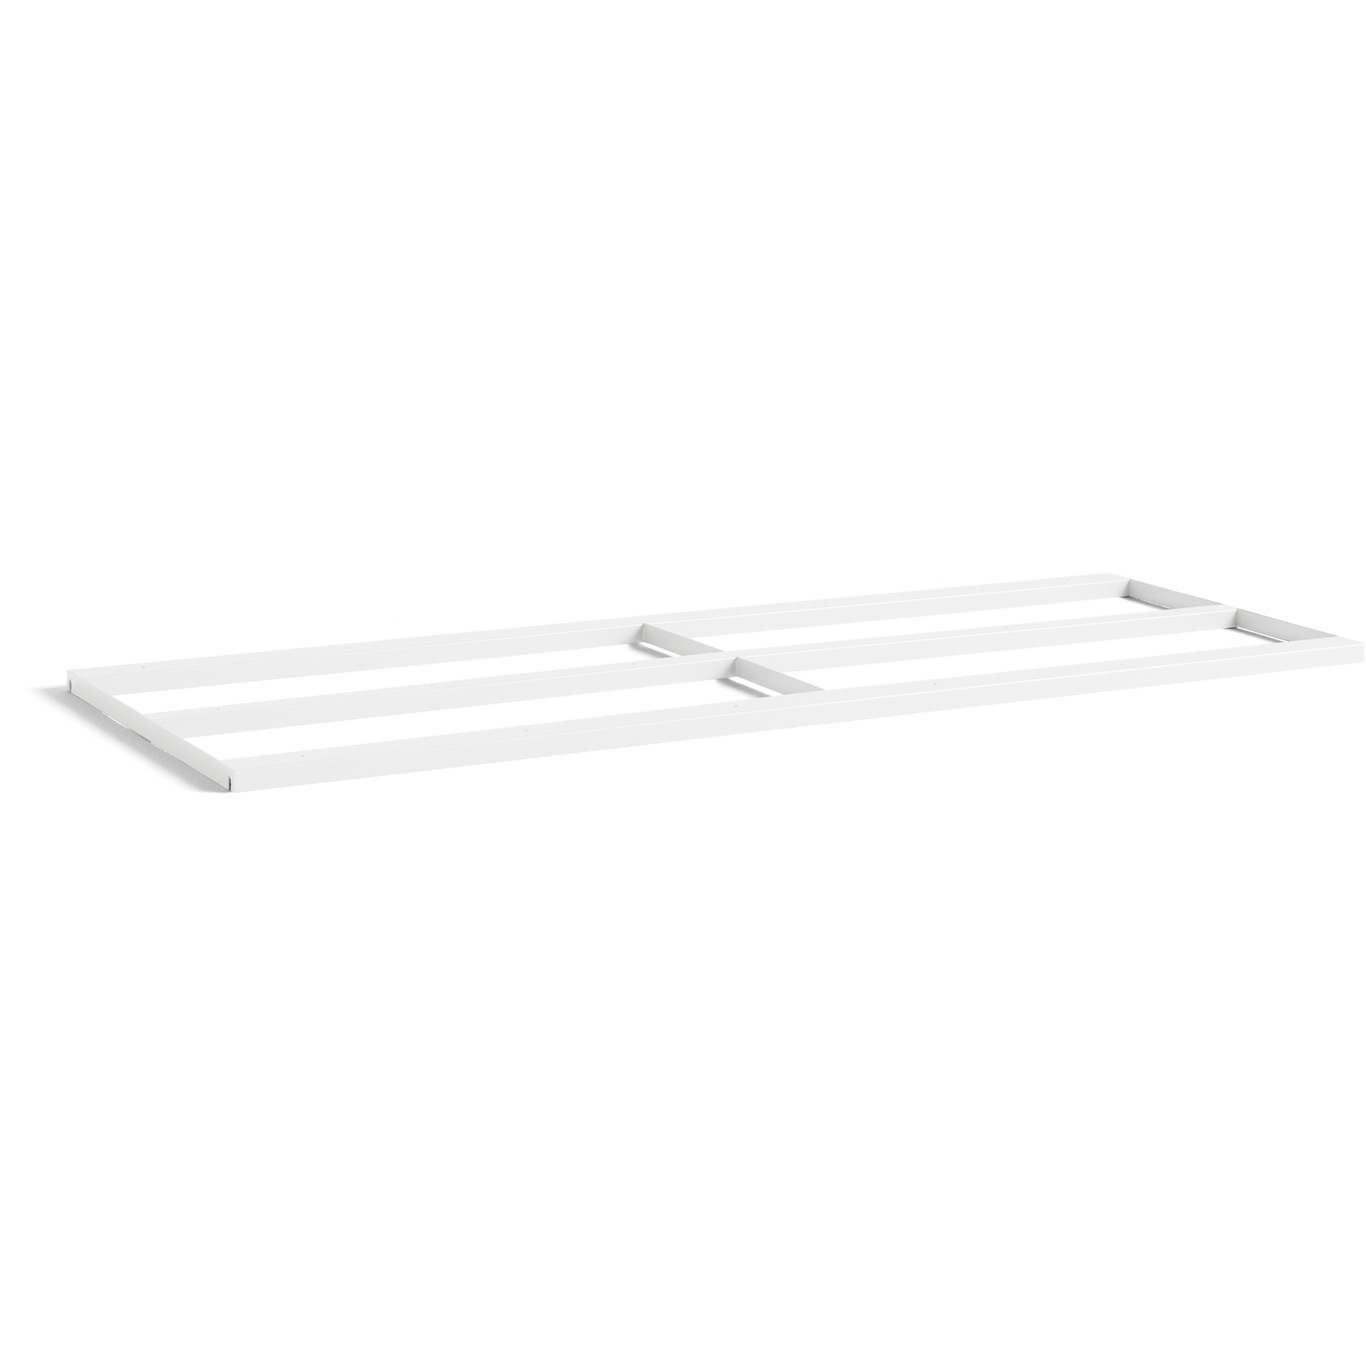 Loop Stand Support 250, White